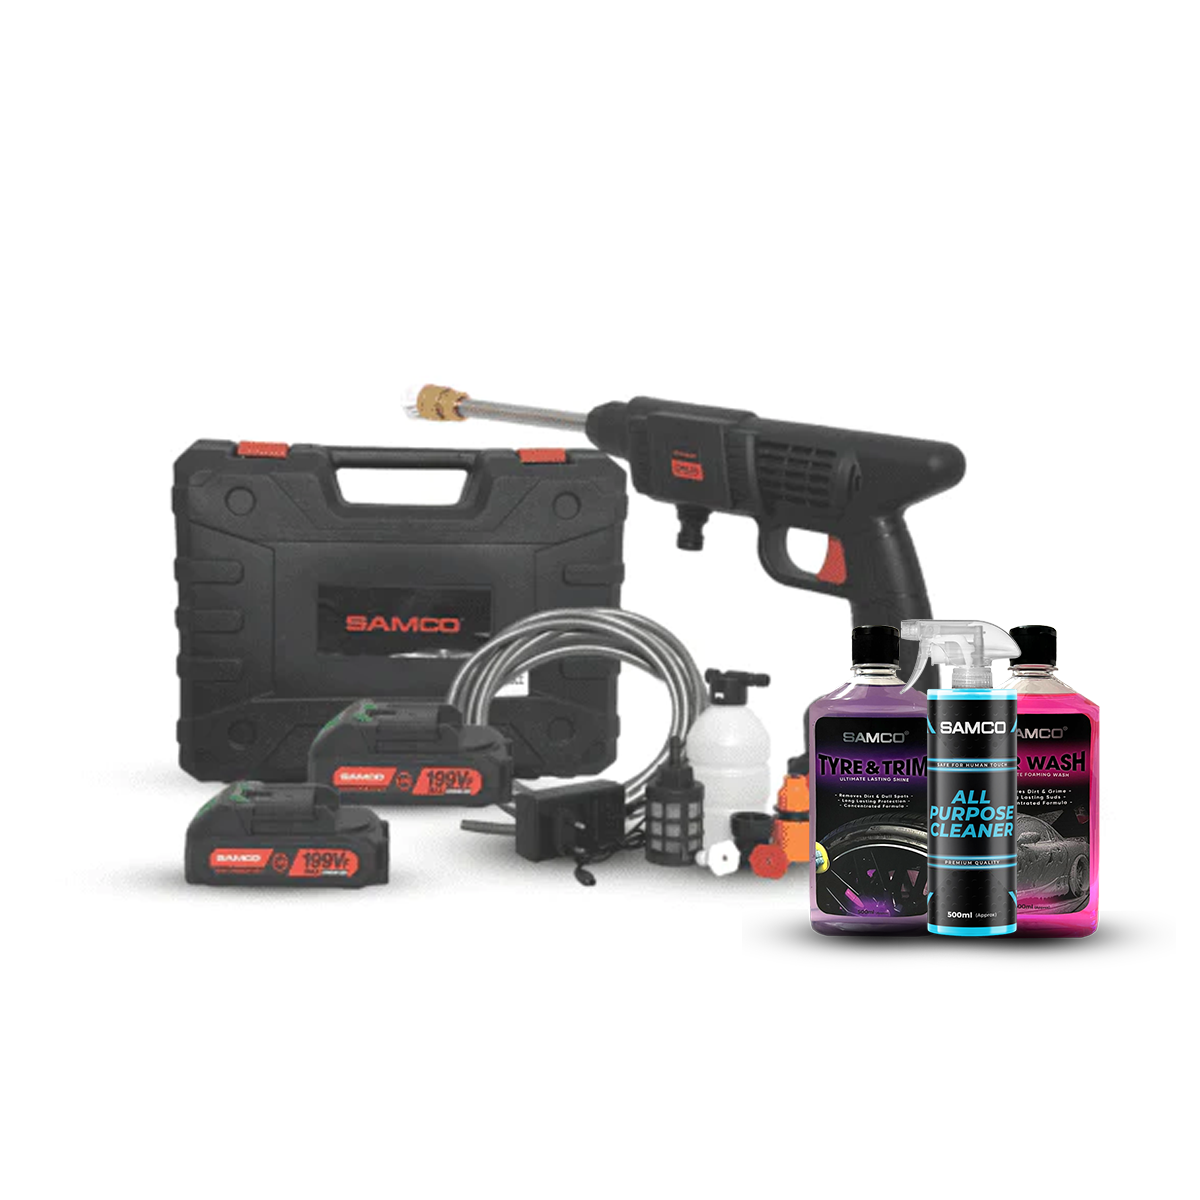 Samco Cordless Pressure Washer - Double Battery + Foaming Shampoo + Samco Tyre & Trim Gel + All Purpose Cleaner - Samco Pakistan